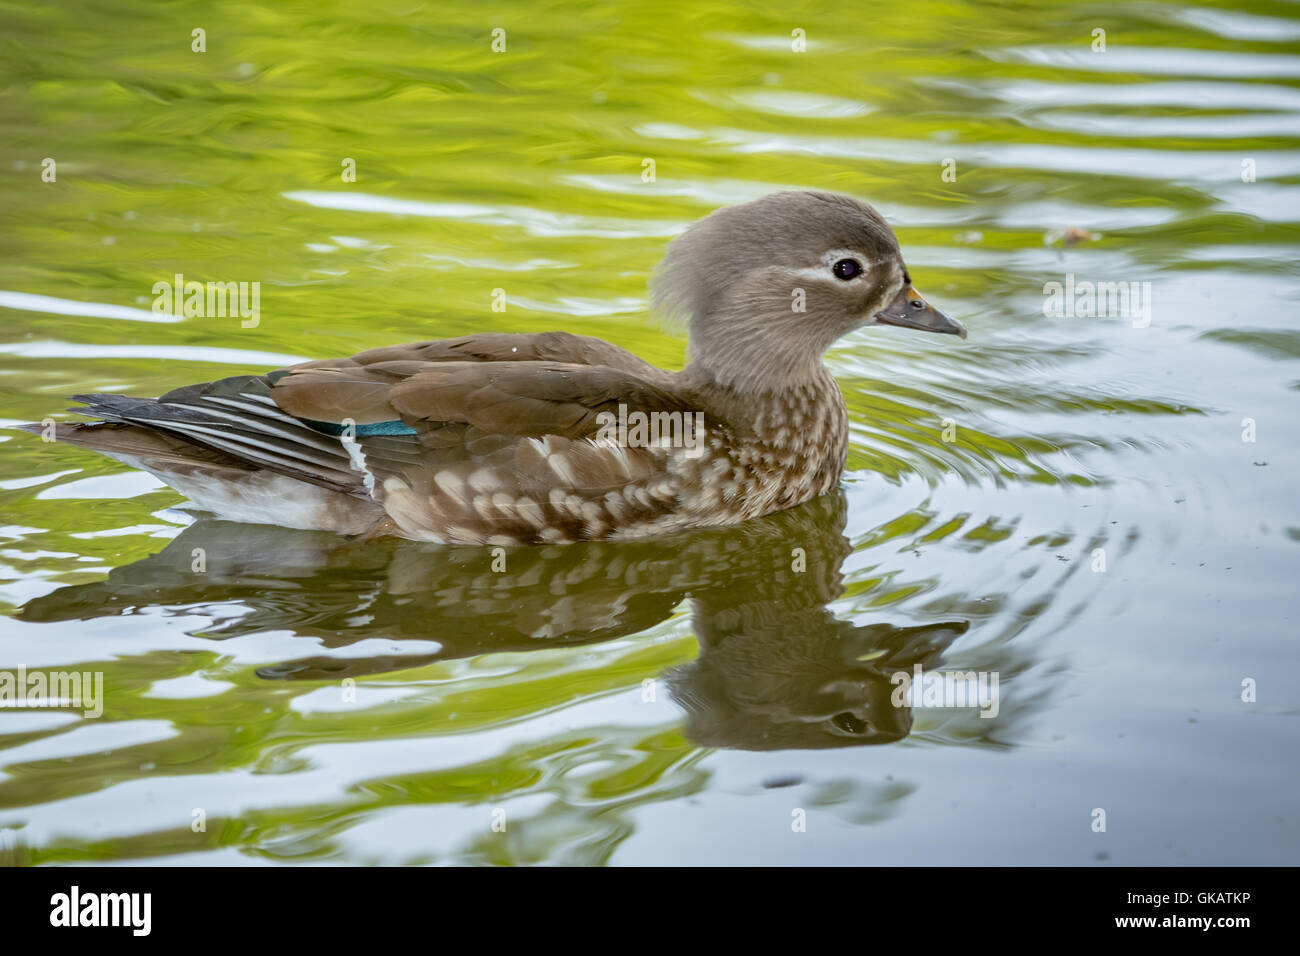 American coot floating on a lake Stock Photo